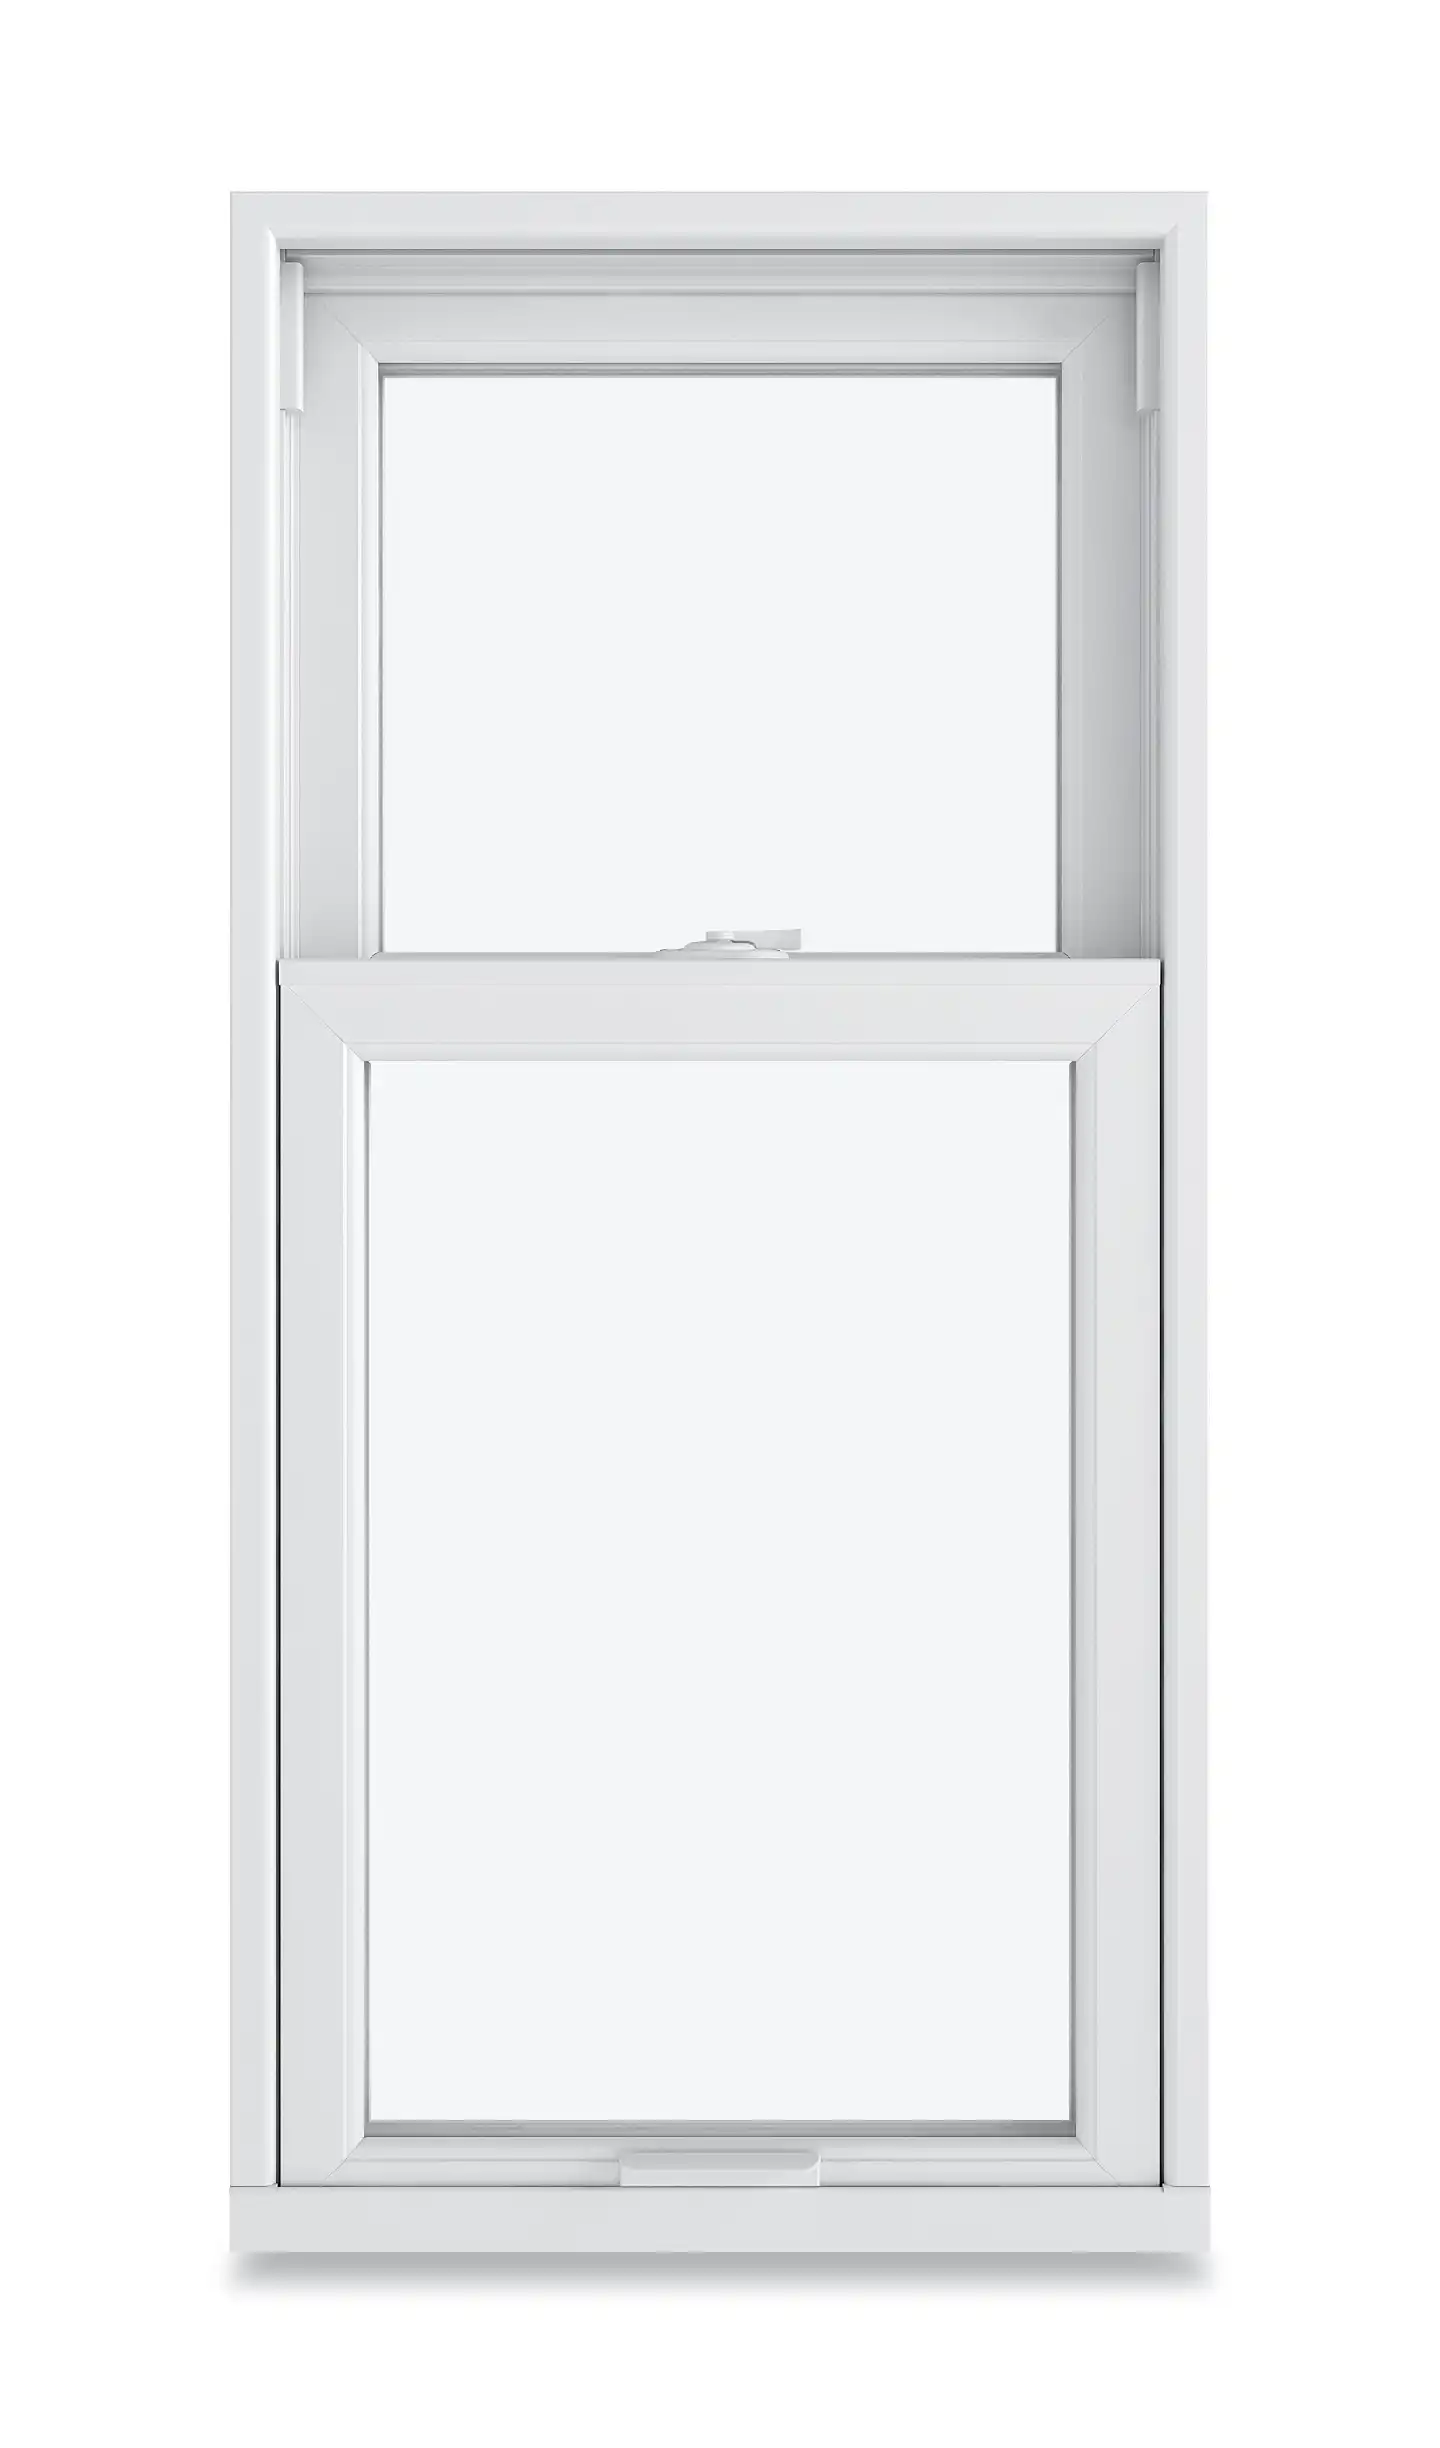 White Marvin Replacement Double Hung Window in Cottage style with a taller lower sash.